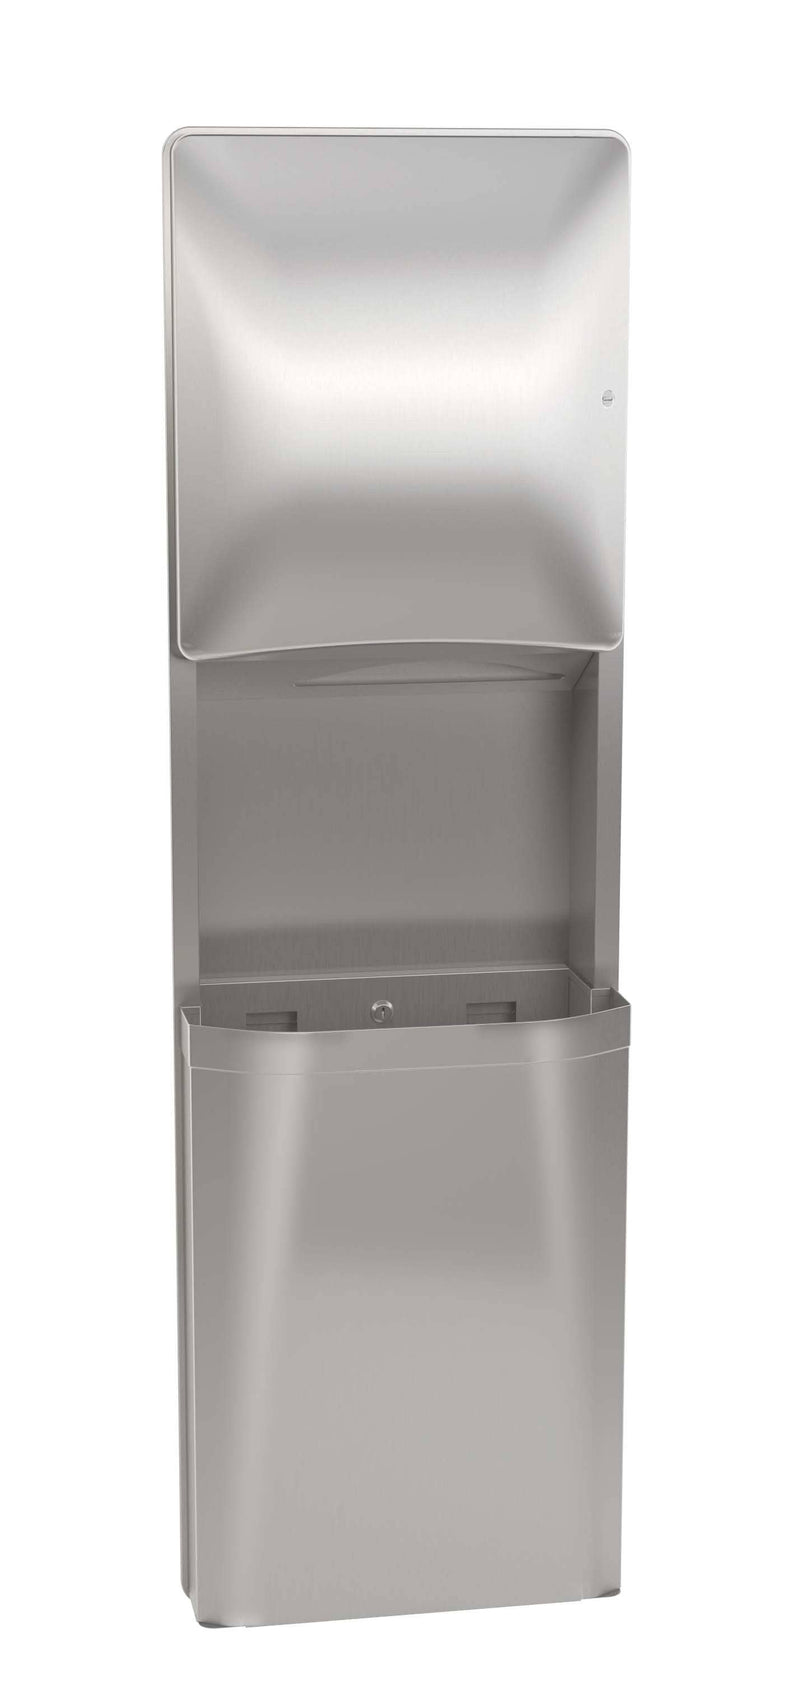 Bradley 2A15-1136 Combination Toilet Paper Dispenser/Waste Receptacle, Surface-Mounted, Stainless Steel - TotalRestroom.com